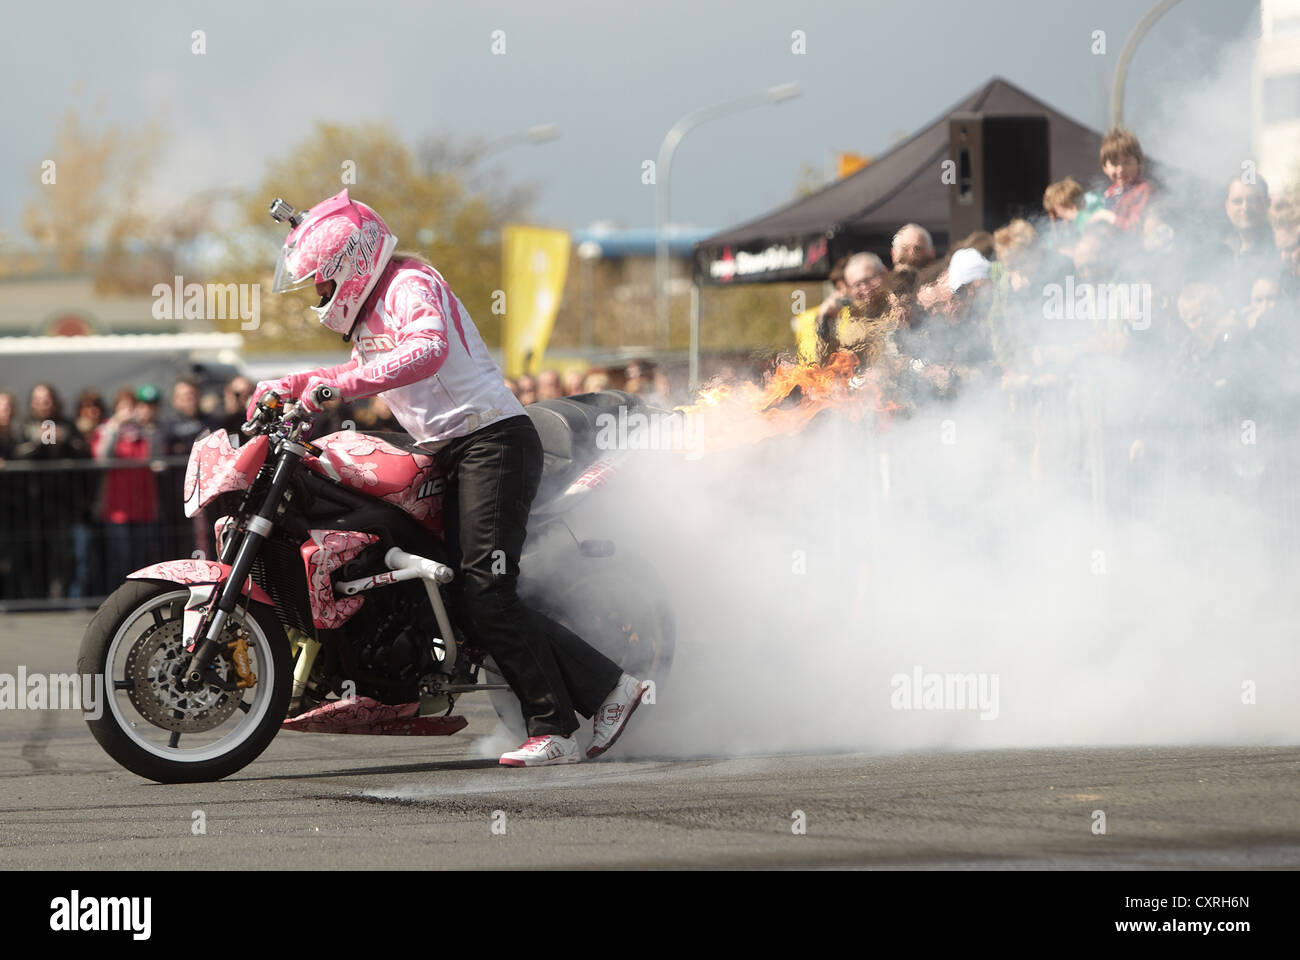 Motorcycle stunt show with stunt woman Mai-Lin Senf at the motorcycle Start-up Day of the ADAC, German automobile club, Koblenz Stock Photo